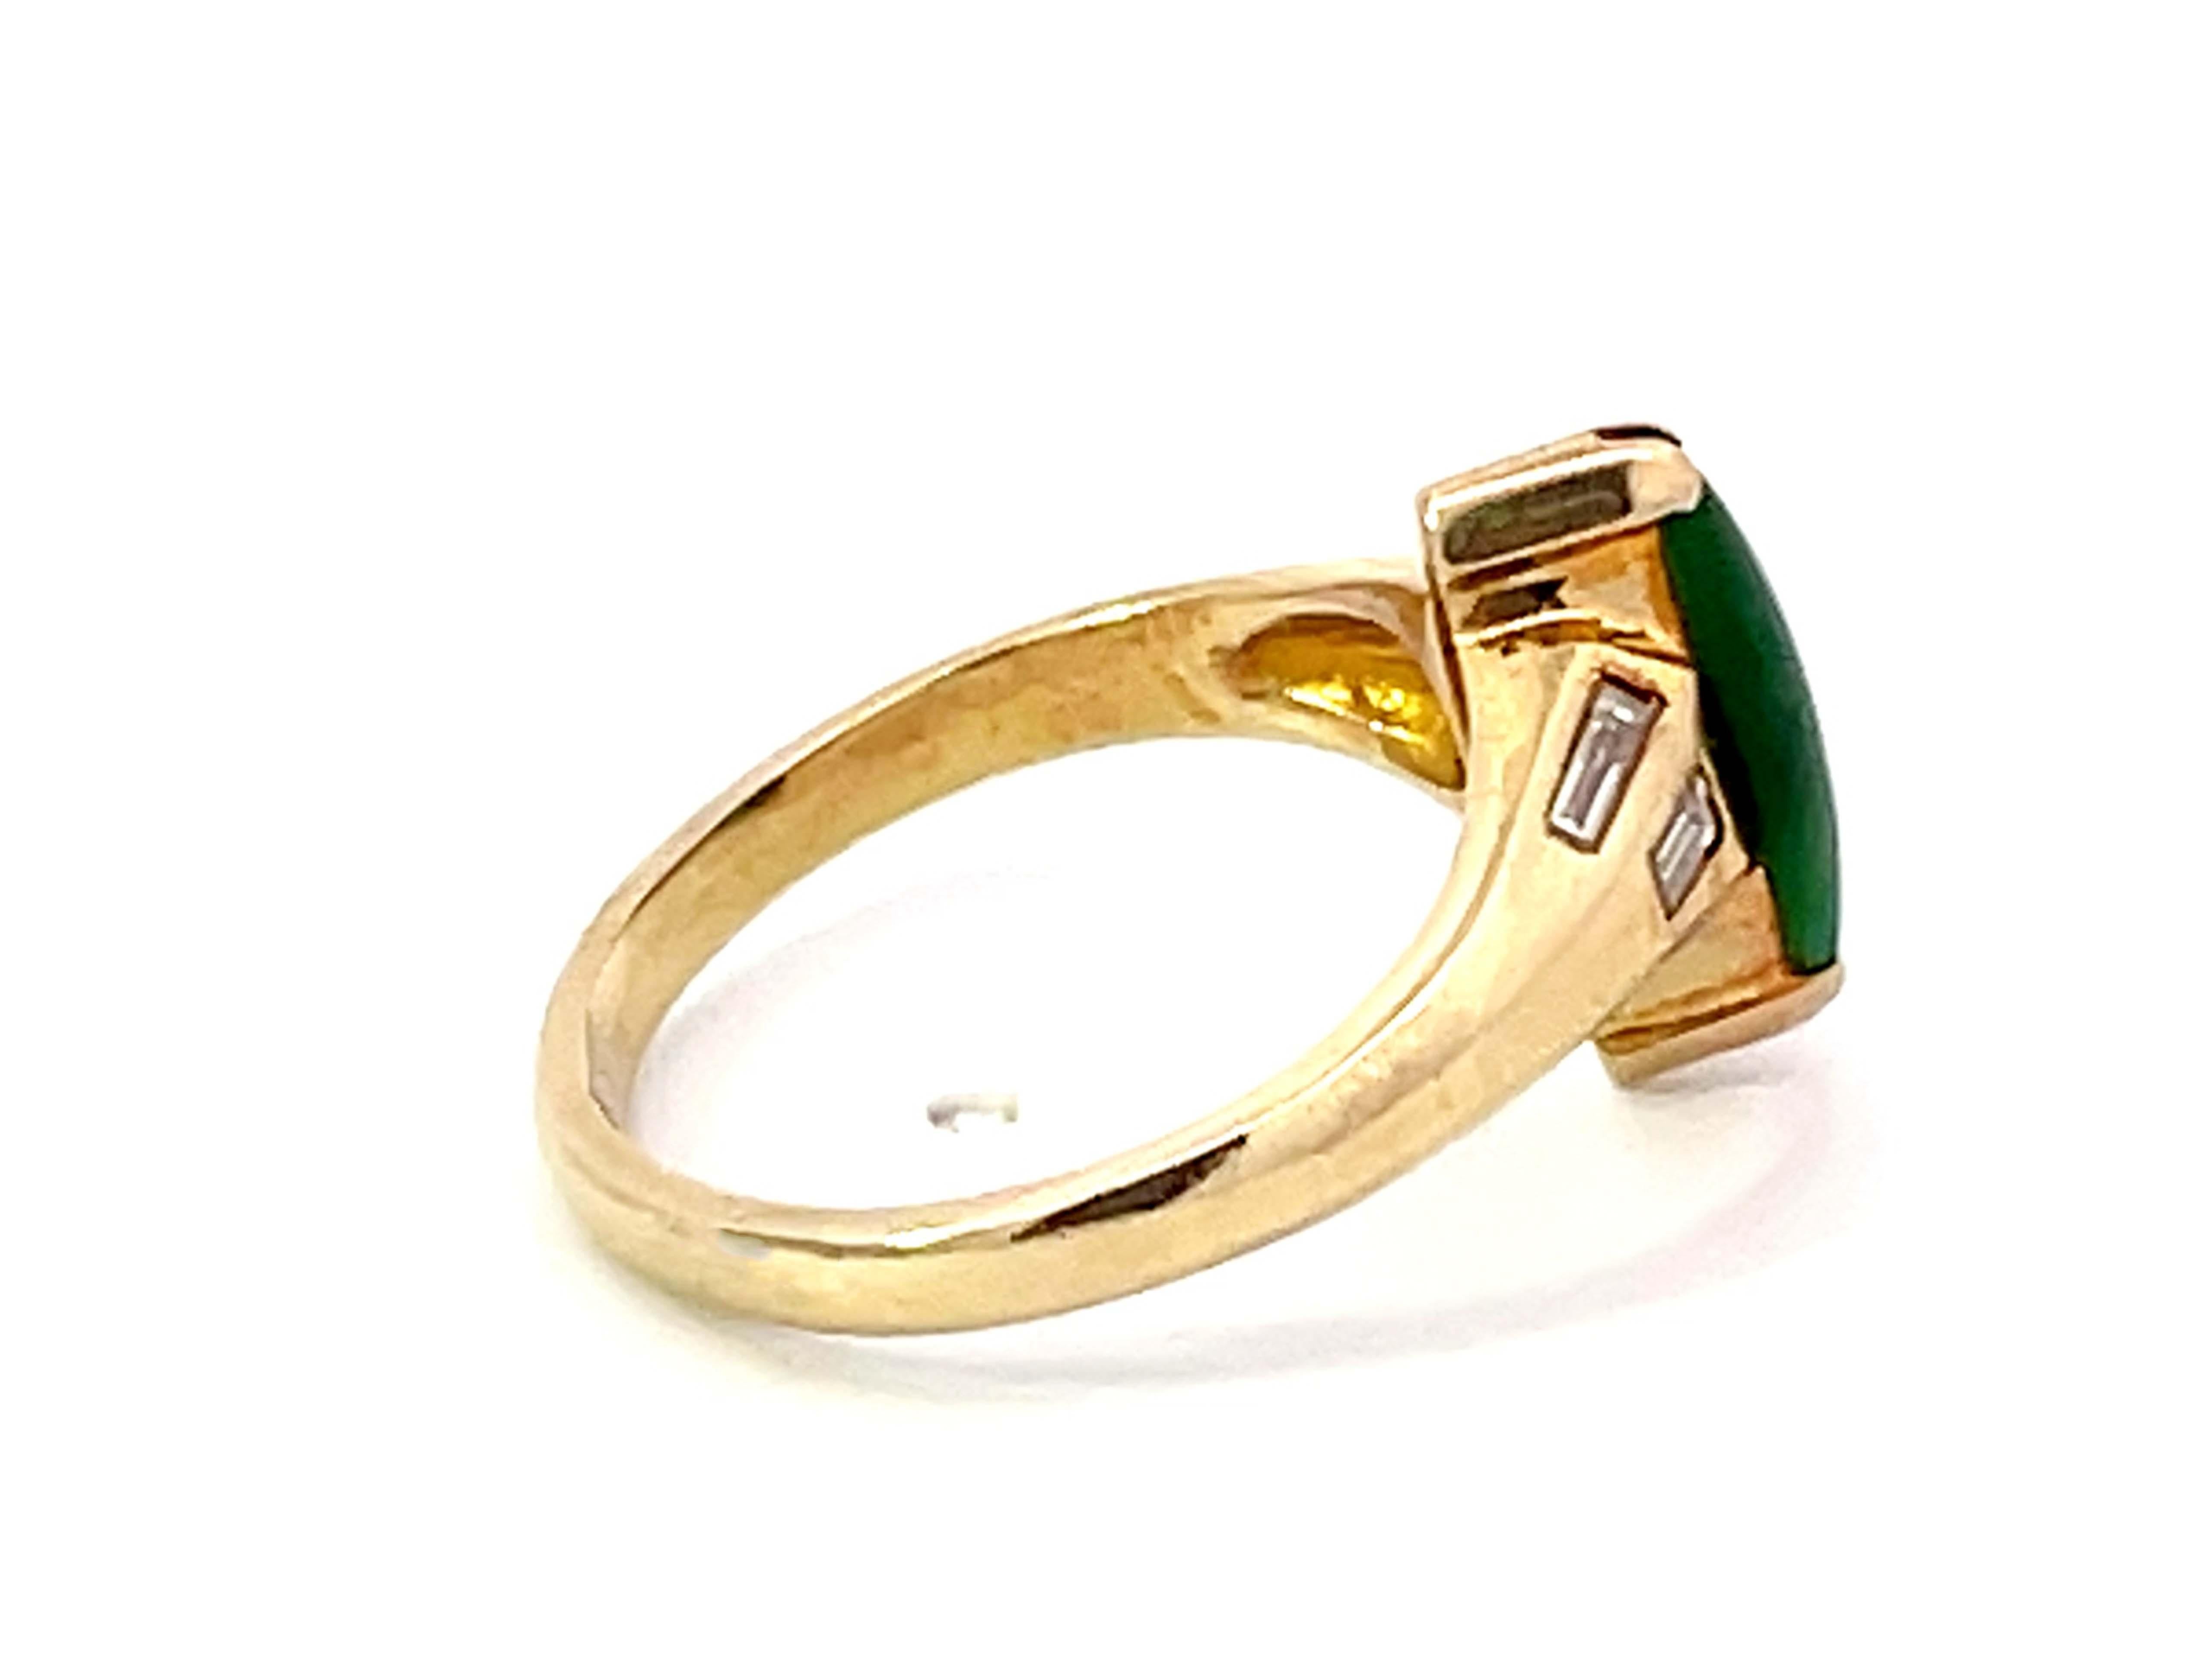 Marquise Jade Baguette Diamond Ring 14k Yellow Gold In Excellent Condition For Sale In Honolulu, HI